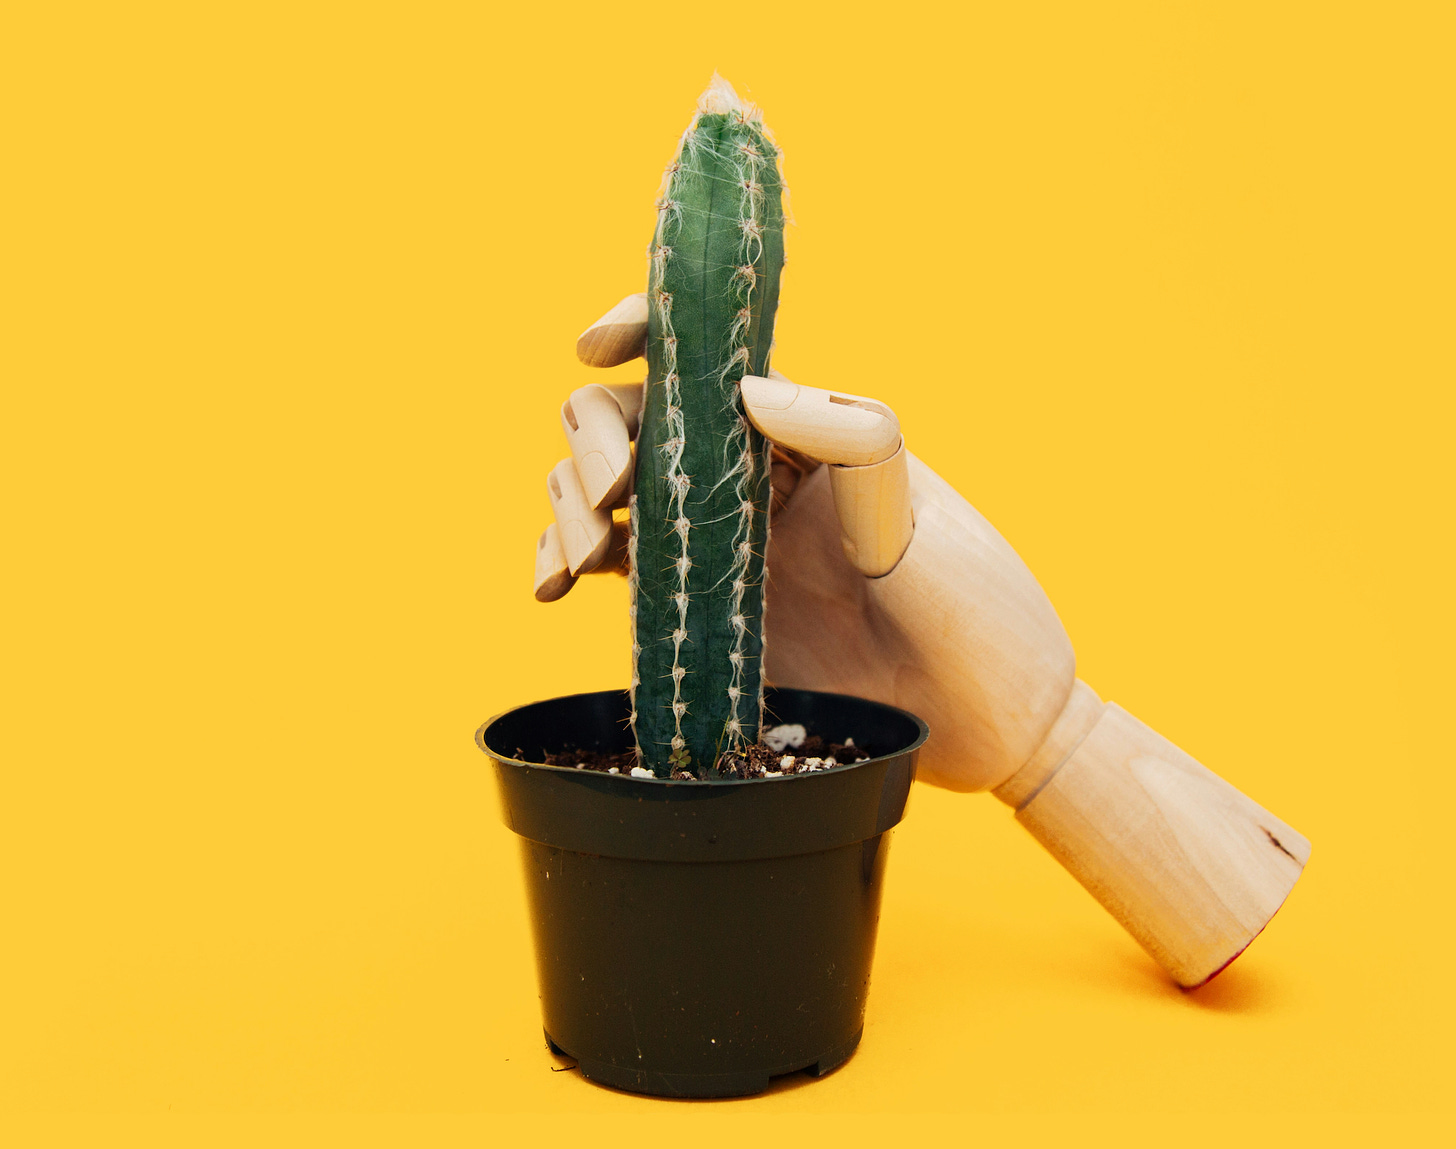 A wooden hand wrapped around a cactus against a yellow background.